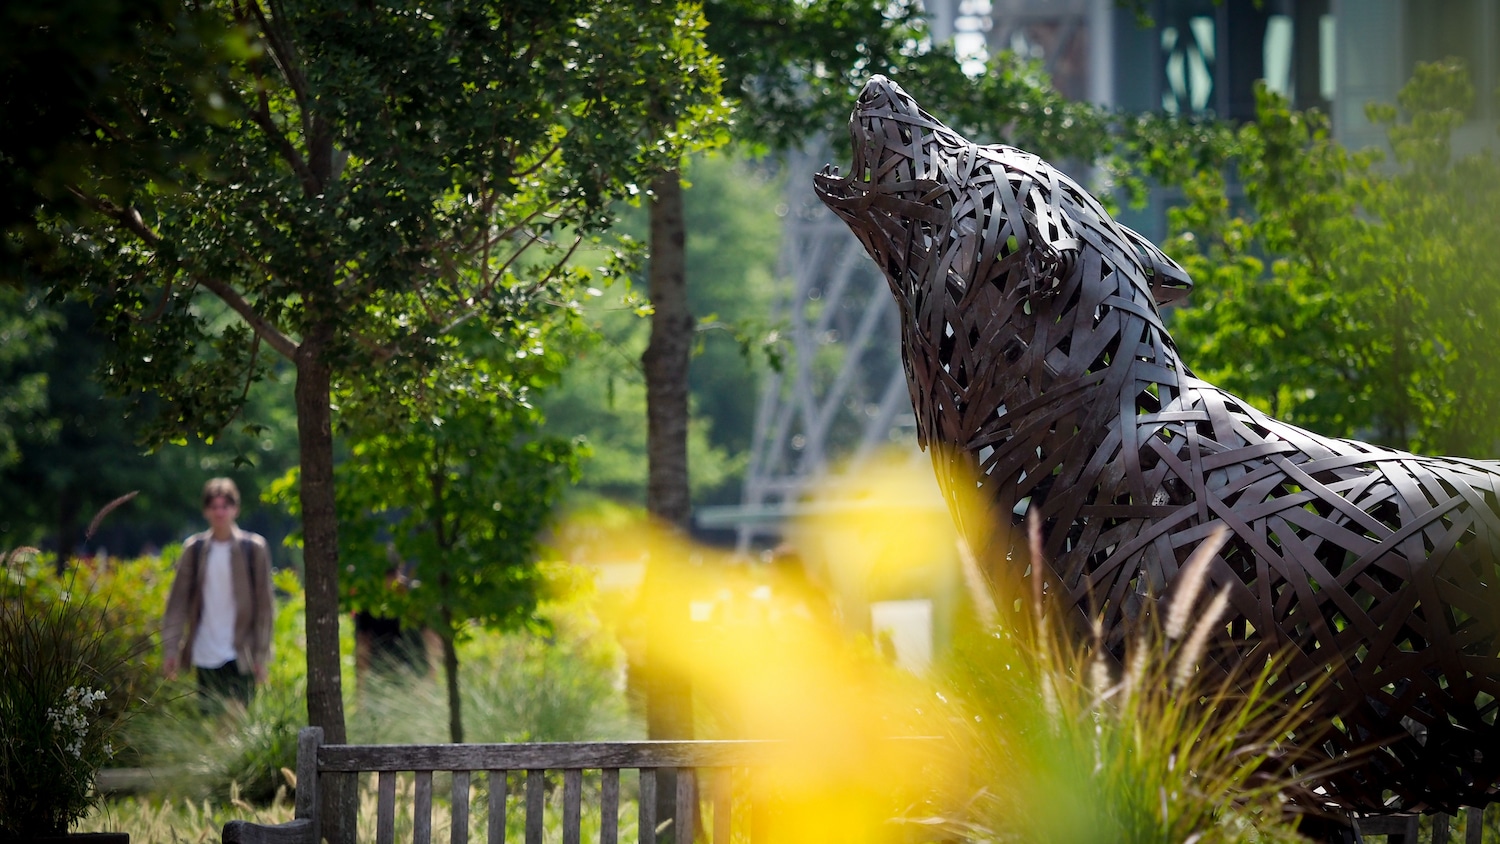 A copper wolf at Wolf Plaza is seen past a yellow flower in bloom.